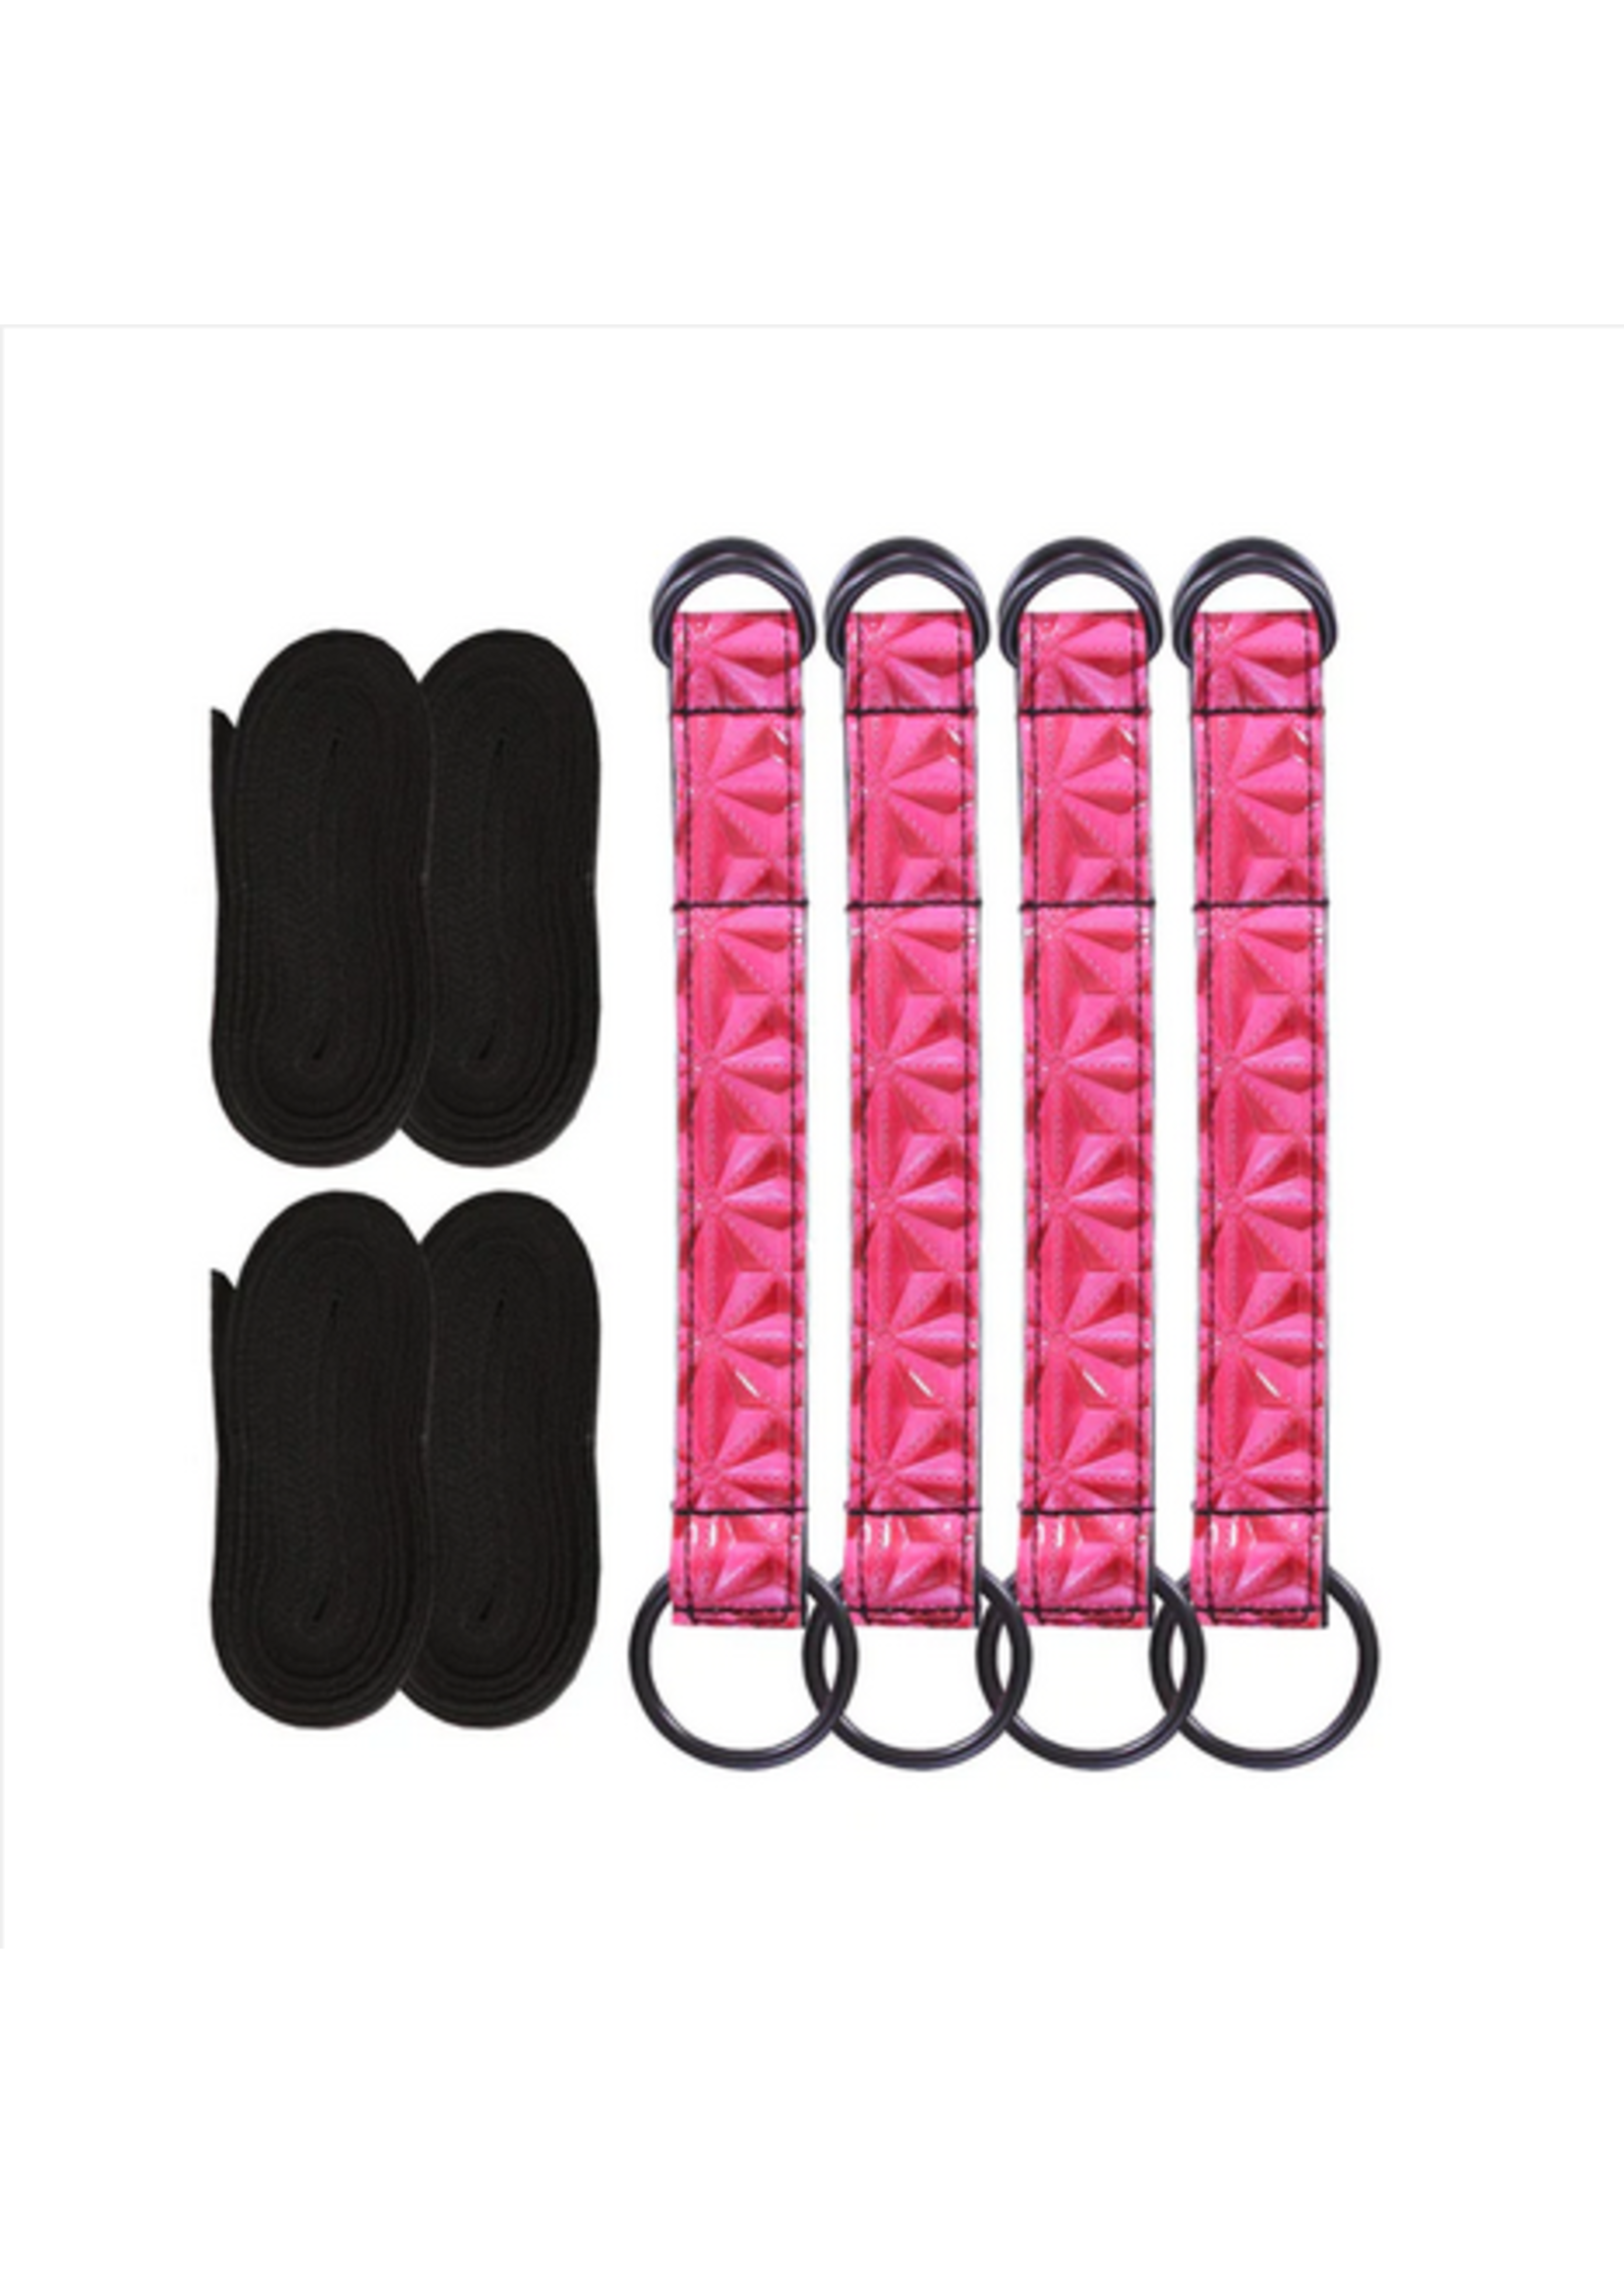 NSN Sinful Bed Restraint Straps Pink